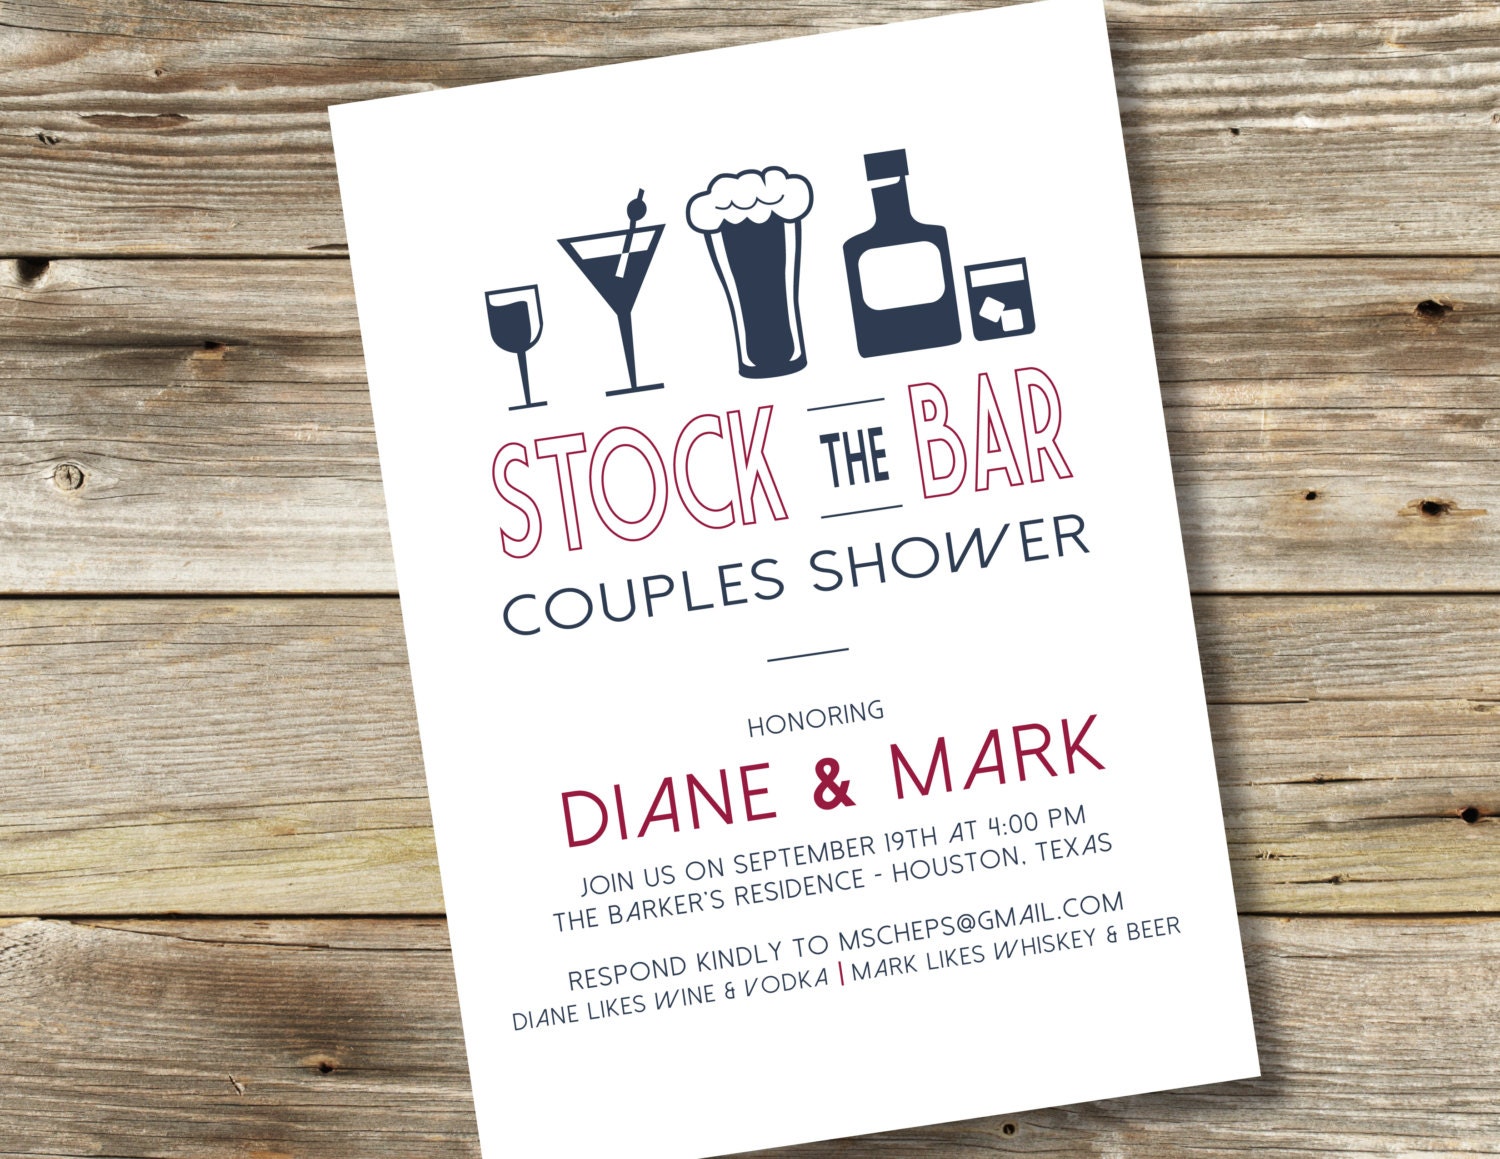 Stock The Bar Couples Shower Invitations 9